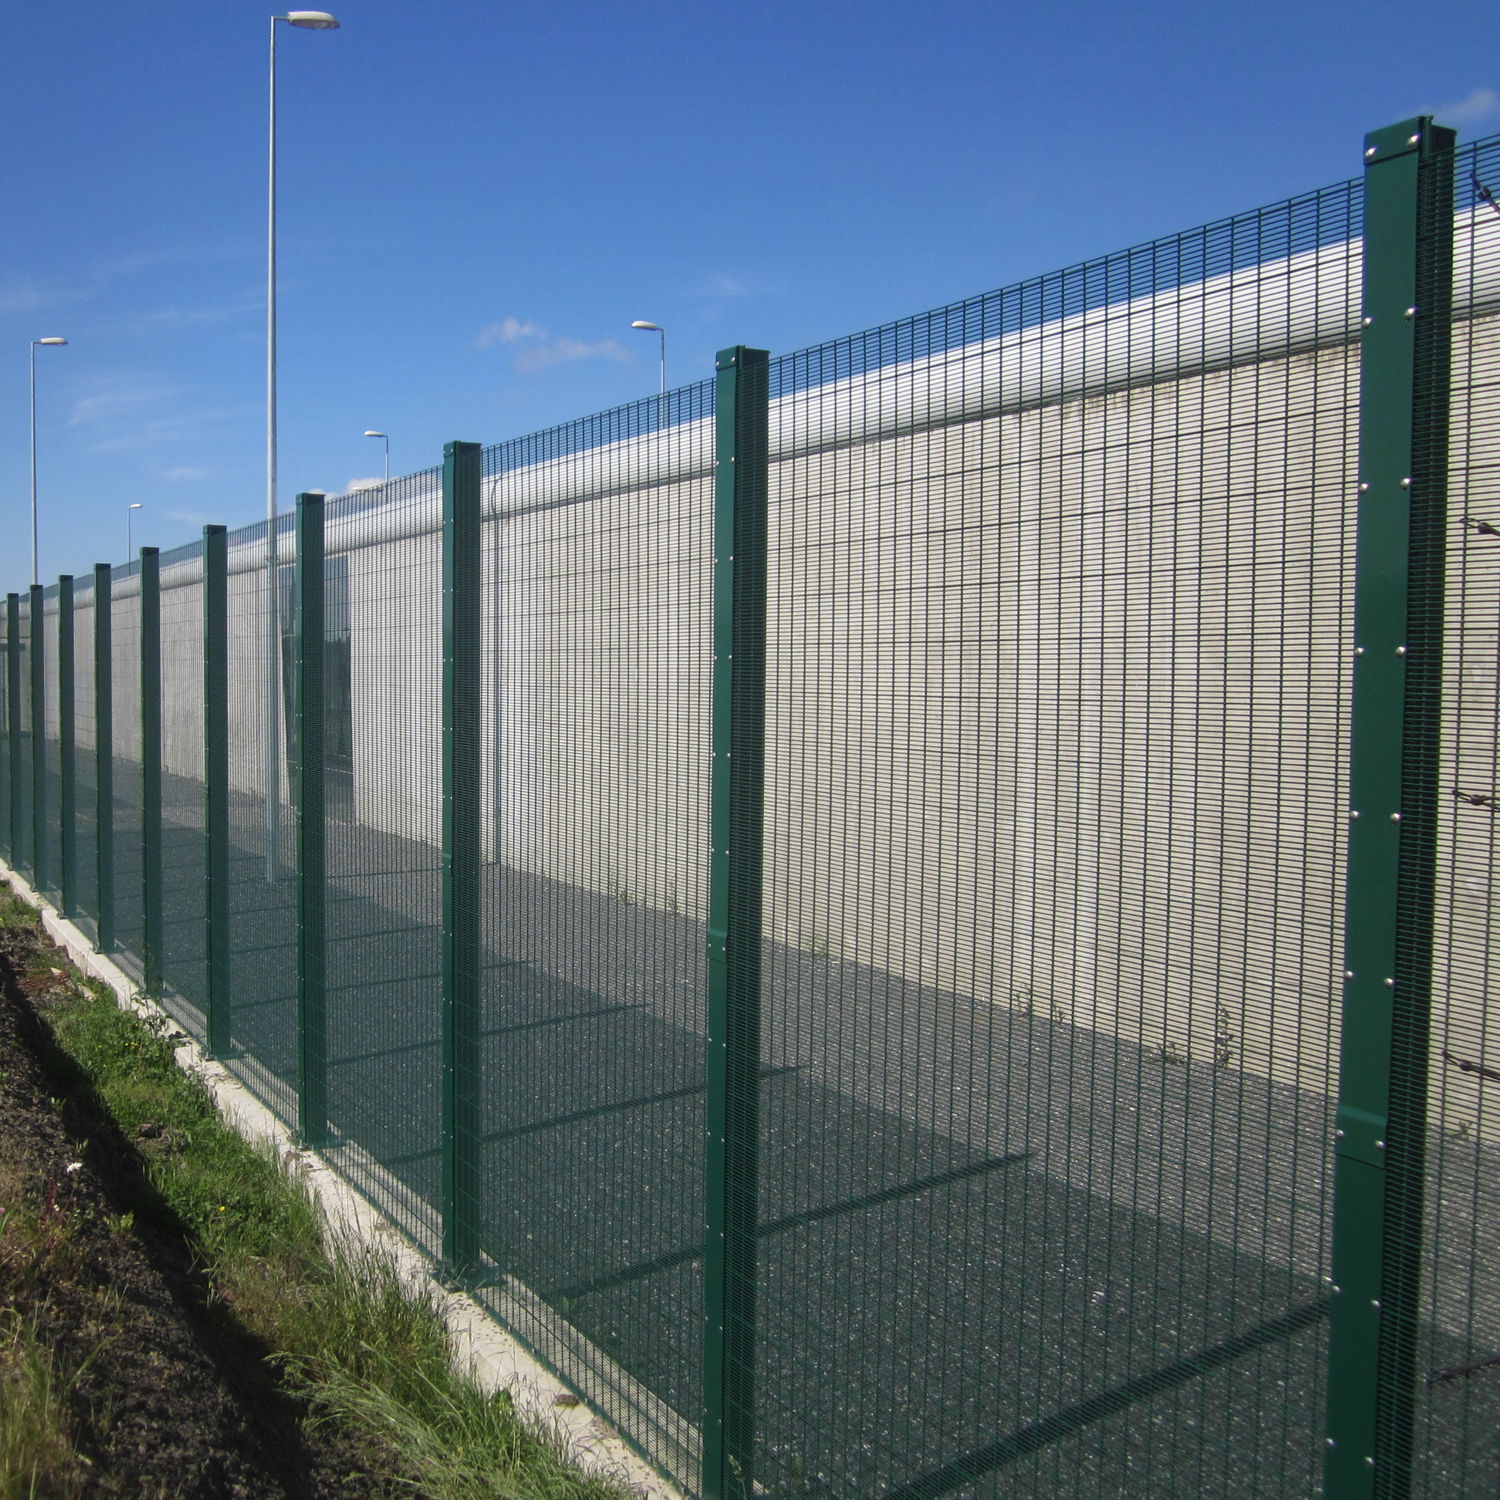 Hot Sell Perimeter 358 Wire Mesh Fence Made in China